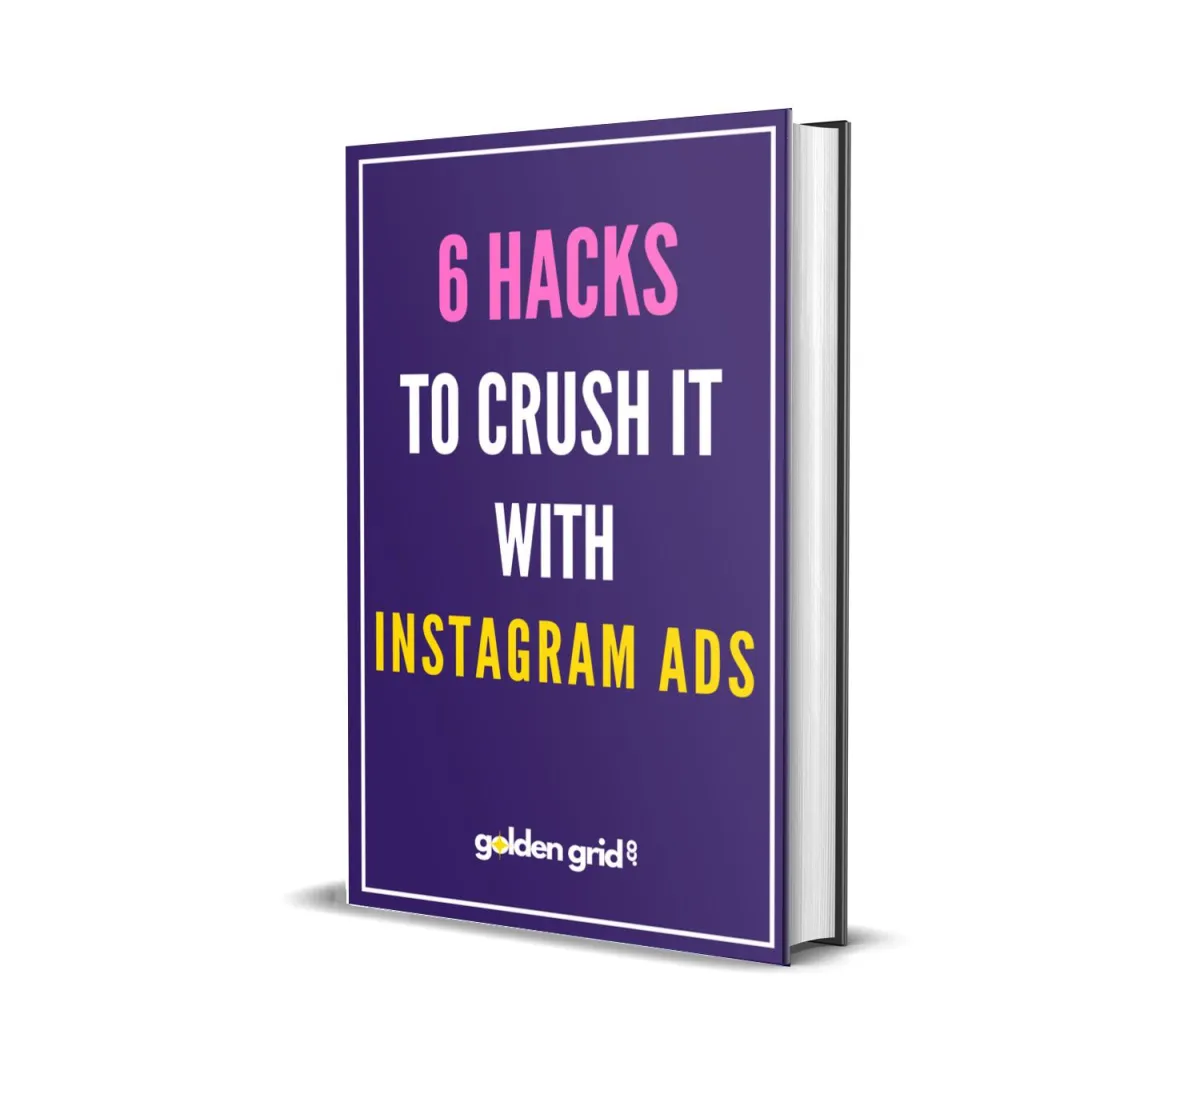 6 Hacks To Crush It With Instagram